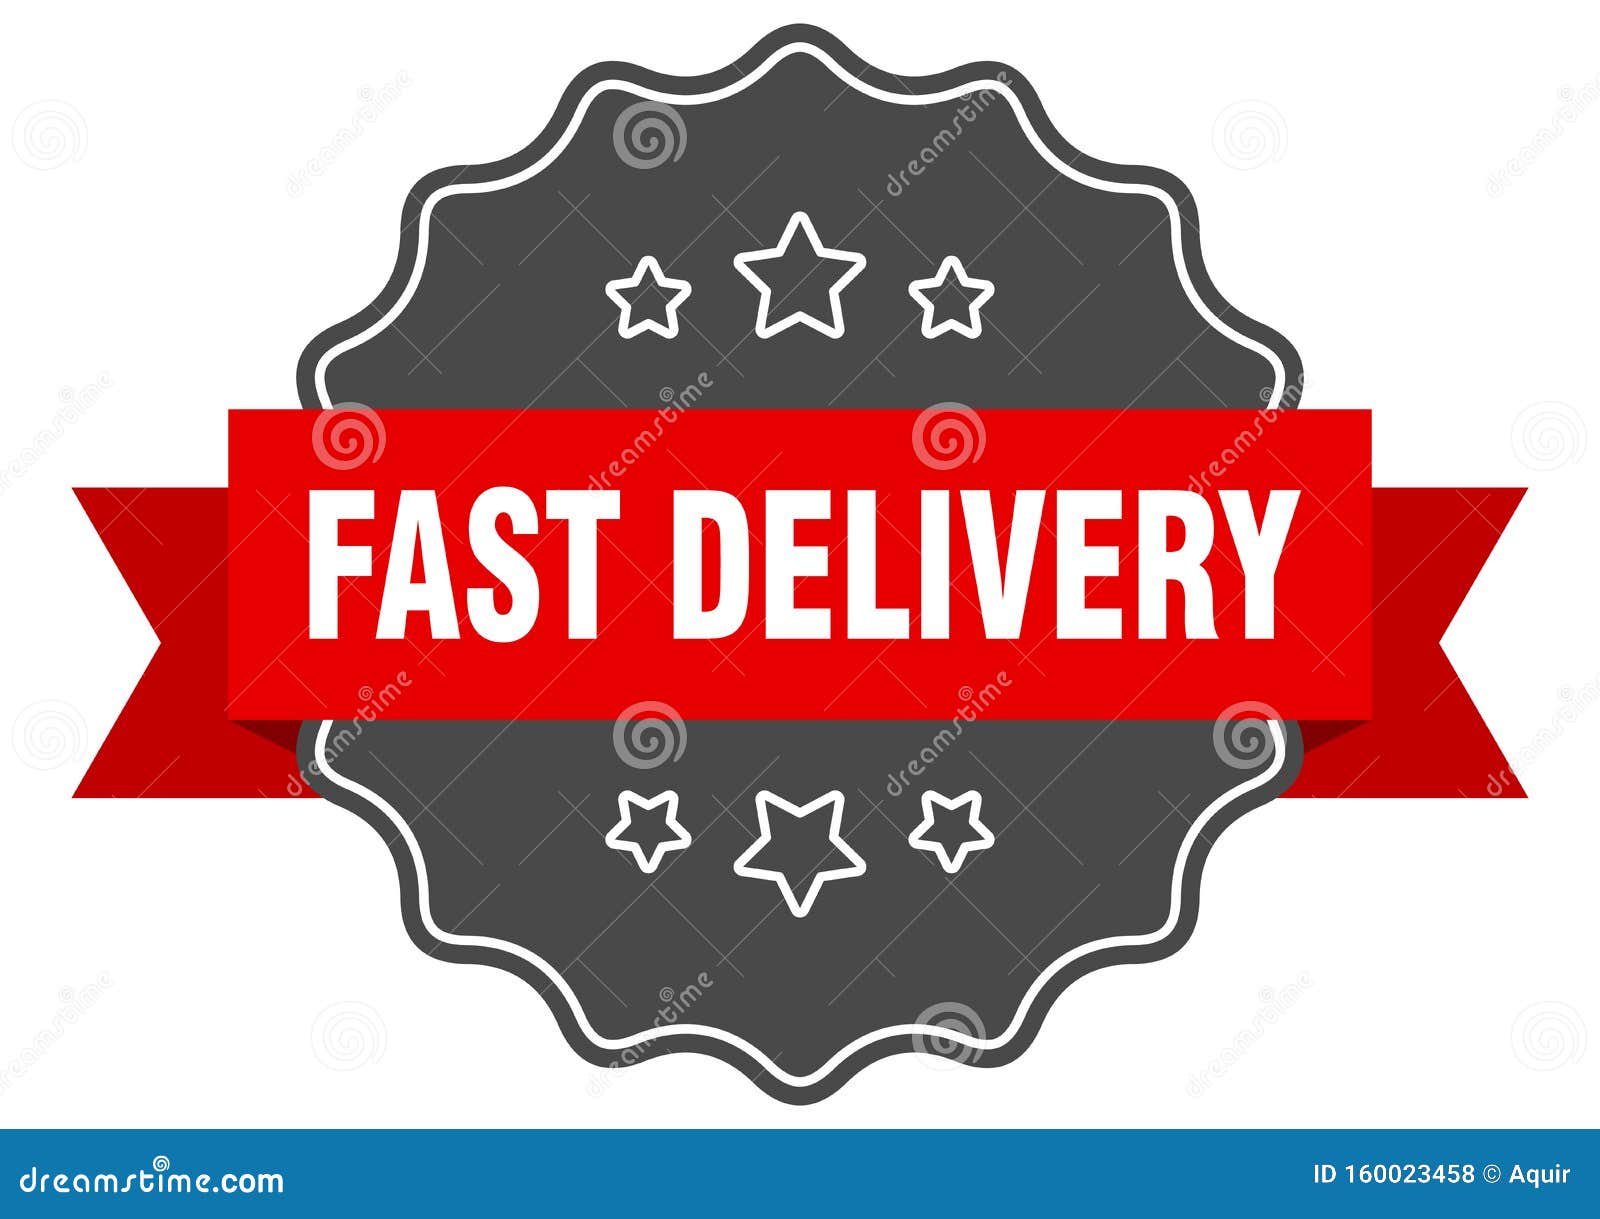 Fast delivery label stock vector. Illustration of round - 160023458